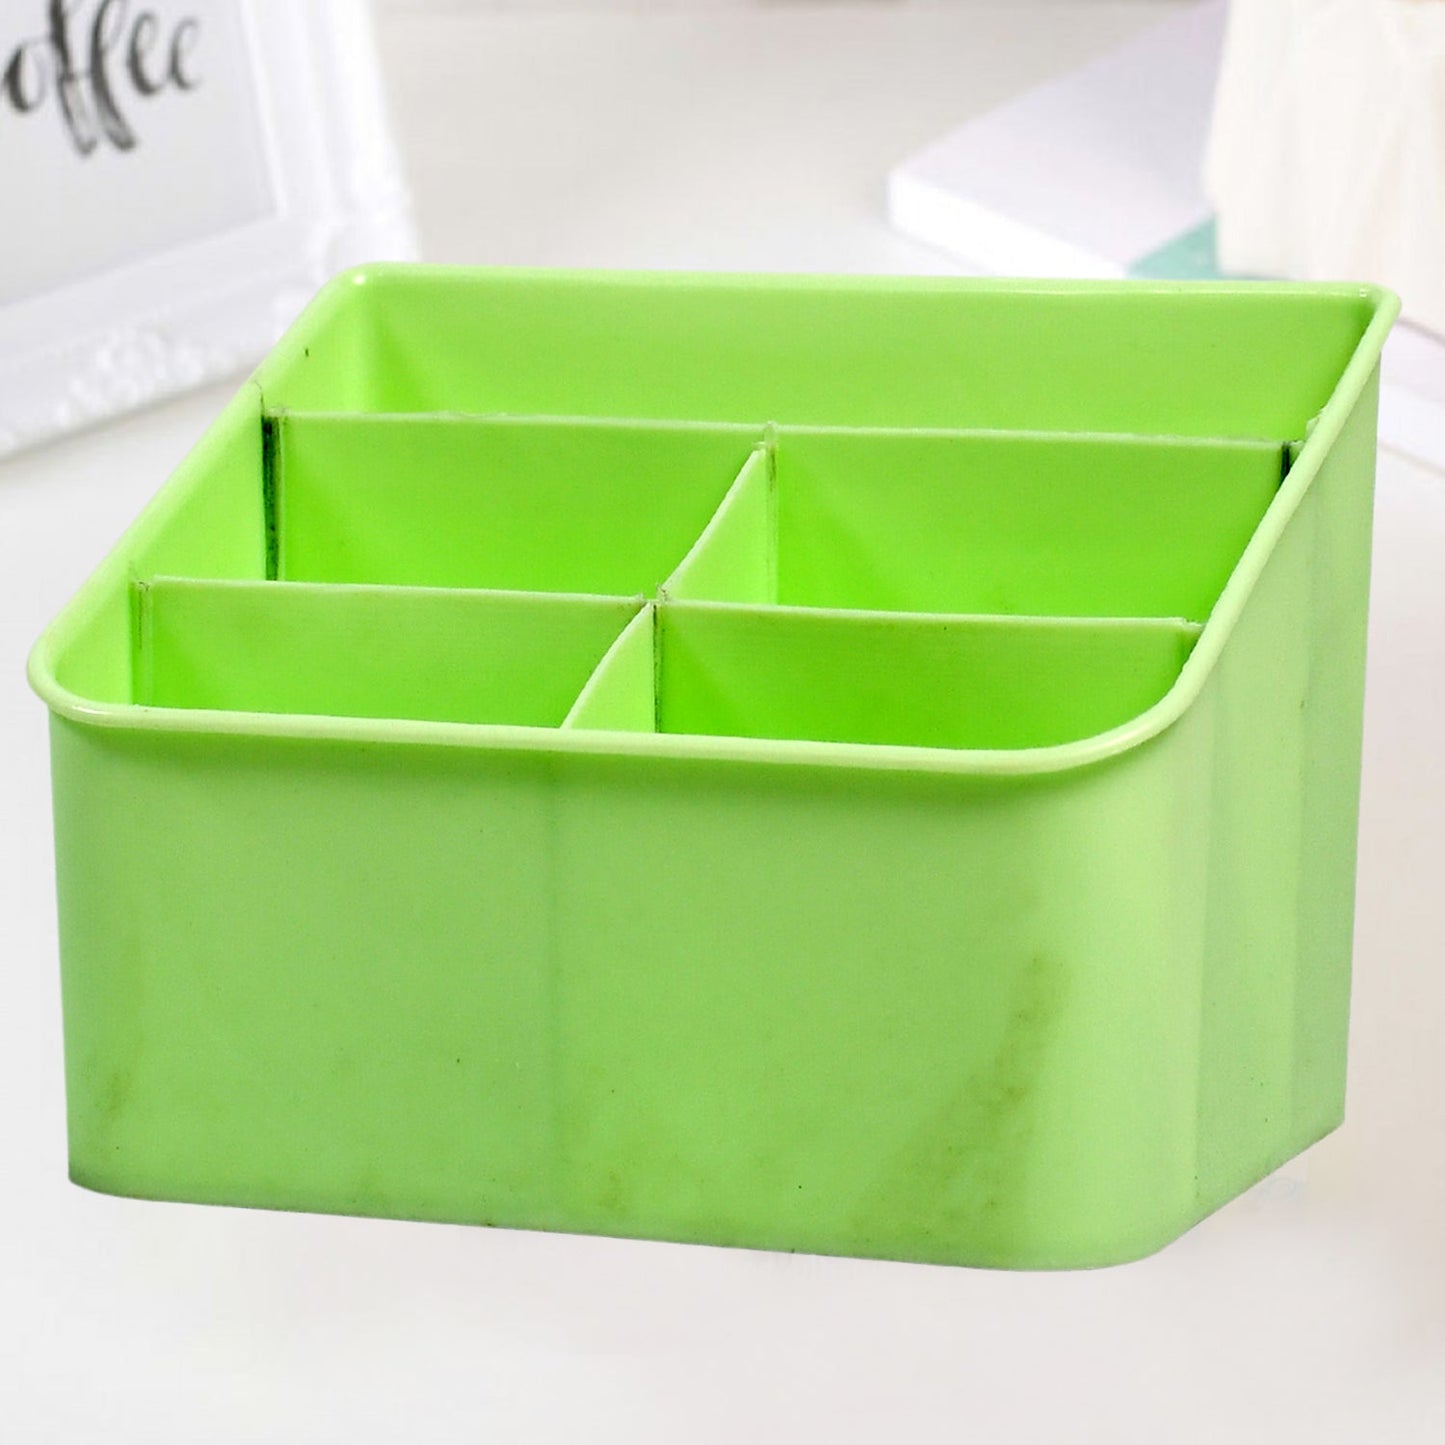 7351 Plastic Multiple Storage Box for Living Room and Bathroom Space Saver Storage Box JK Trends